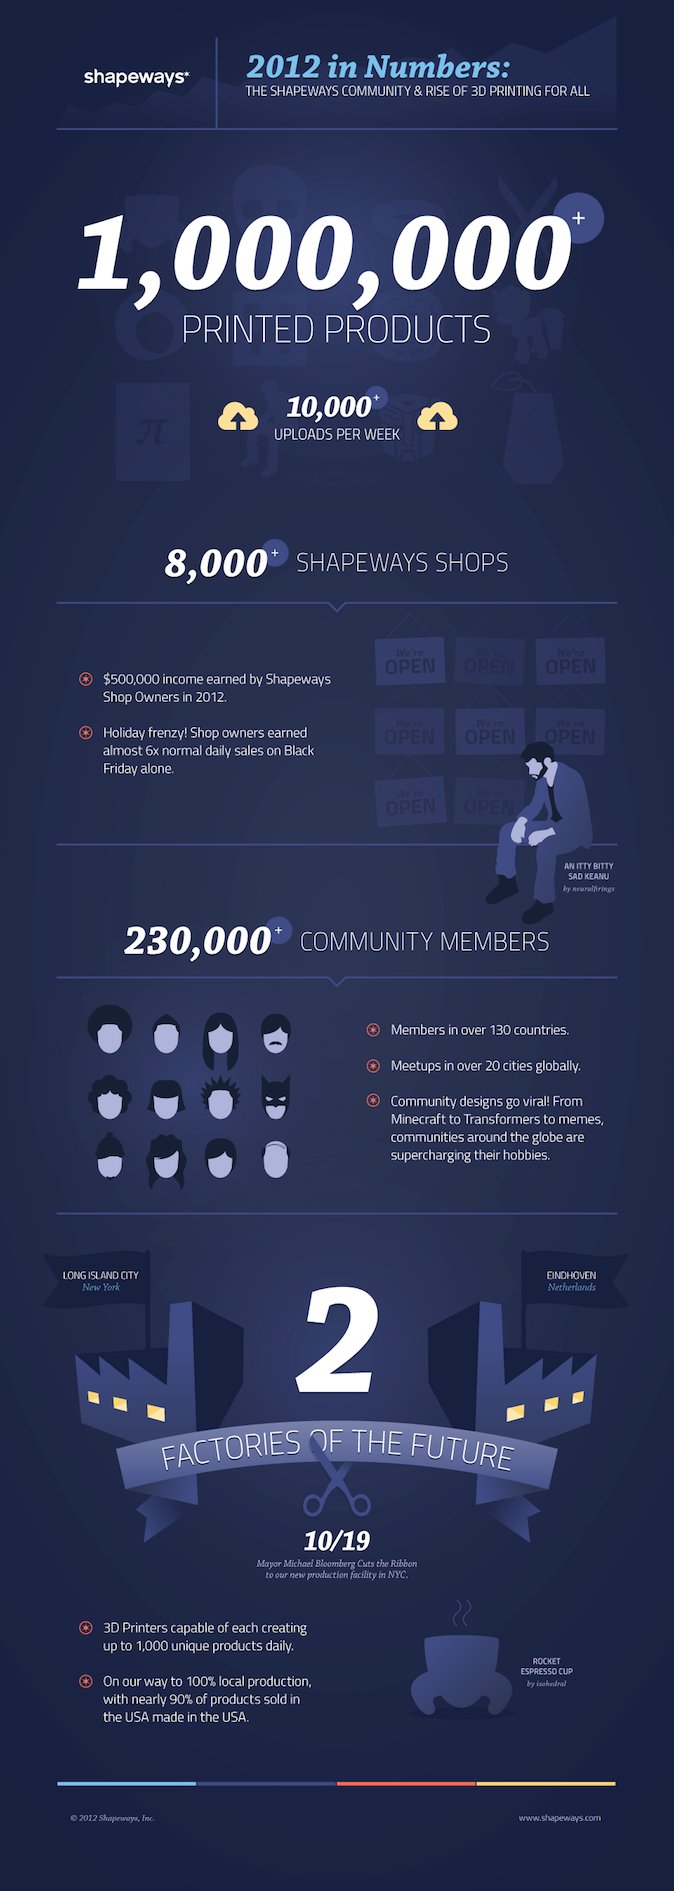 Shapeways Year in Numbers 2012